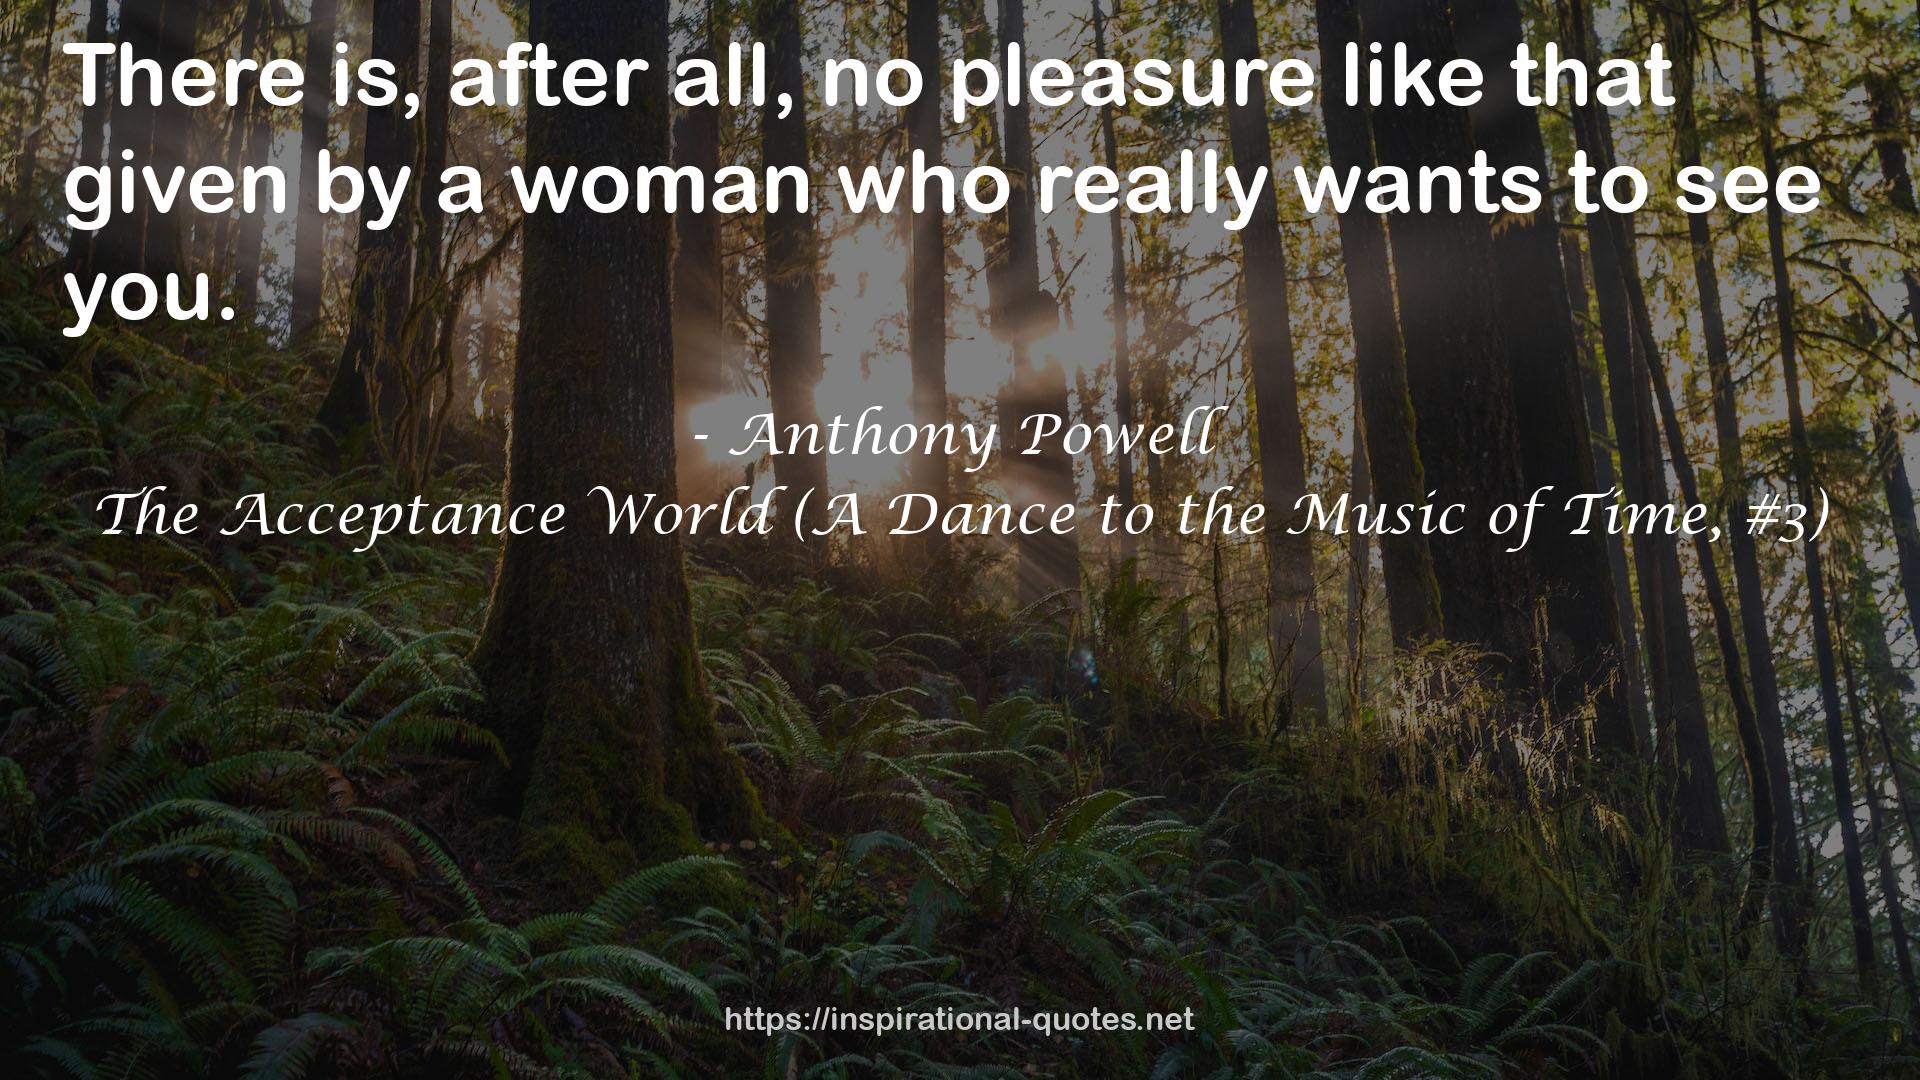 The Acceptance World (A Dance to the Music of Time, #3) QUOTES